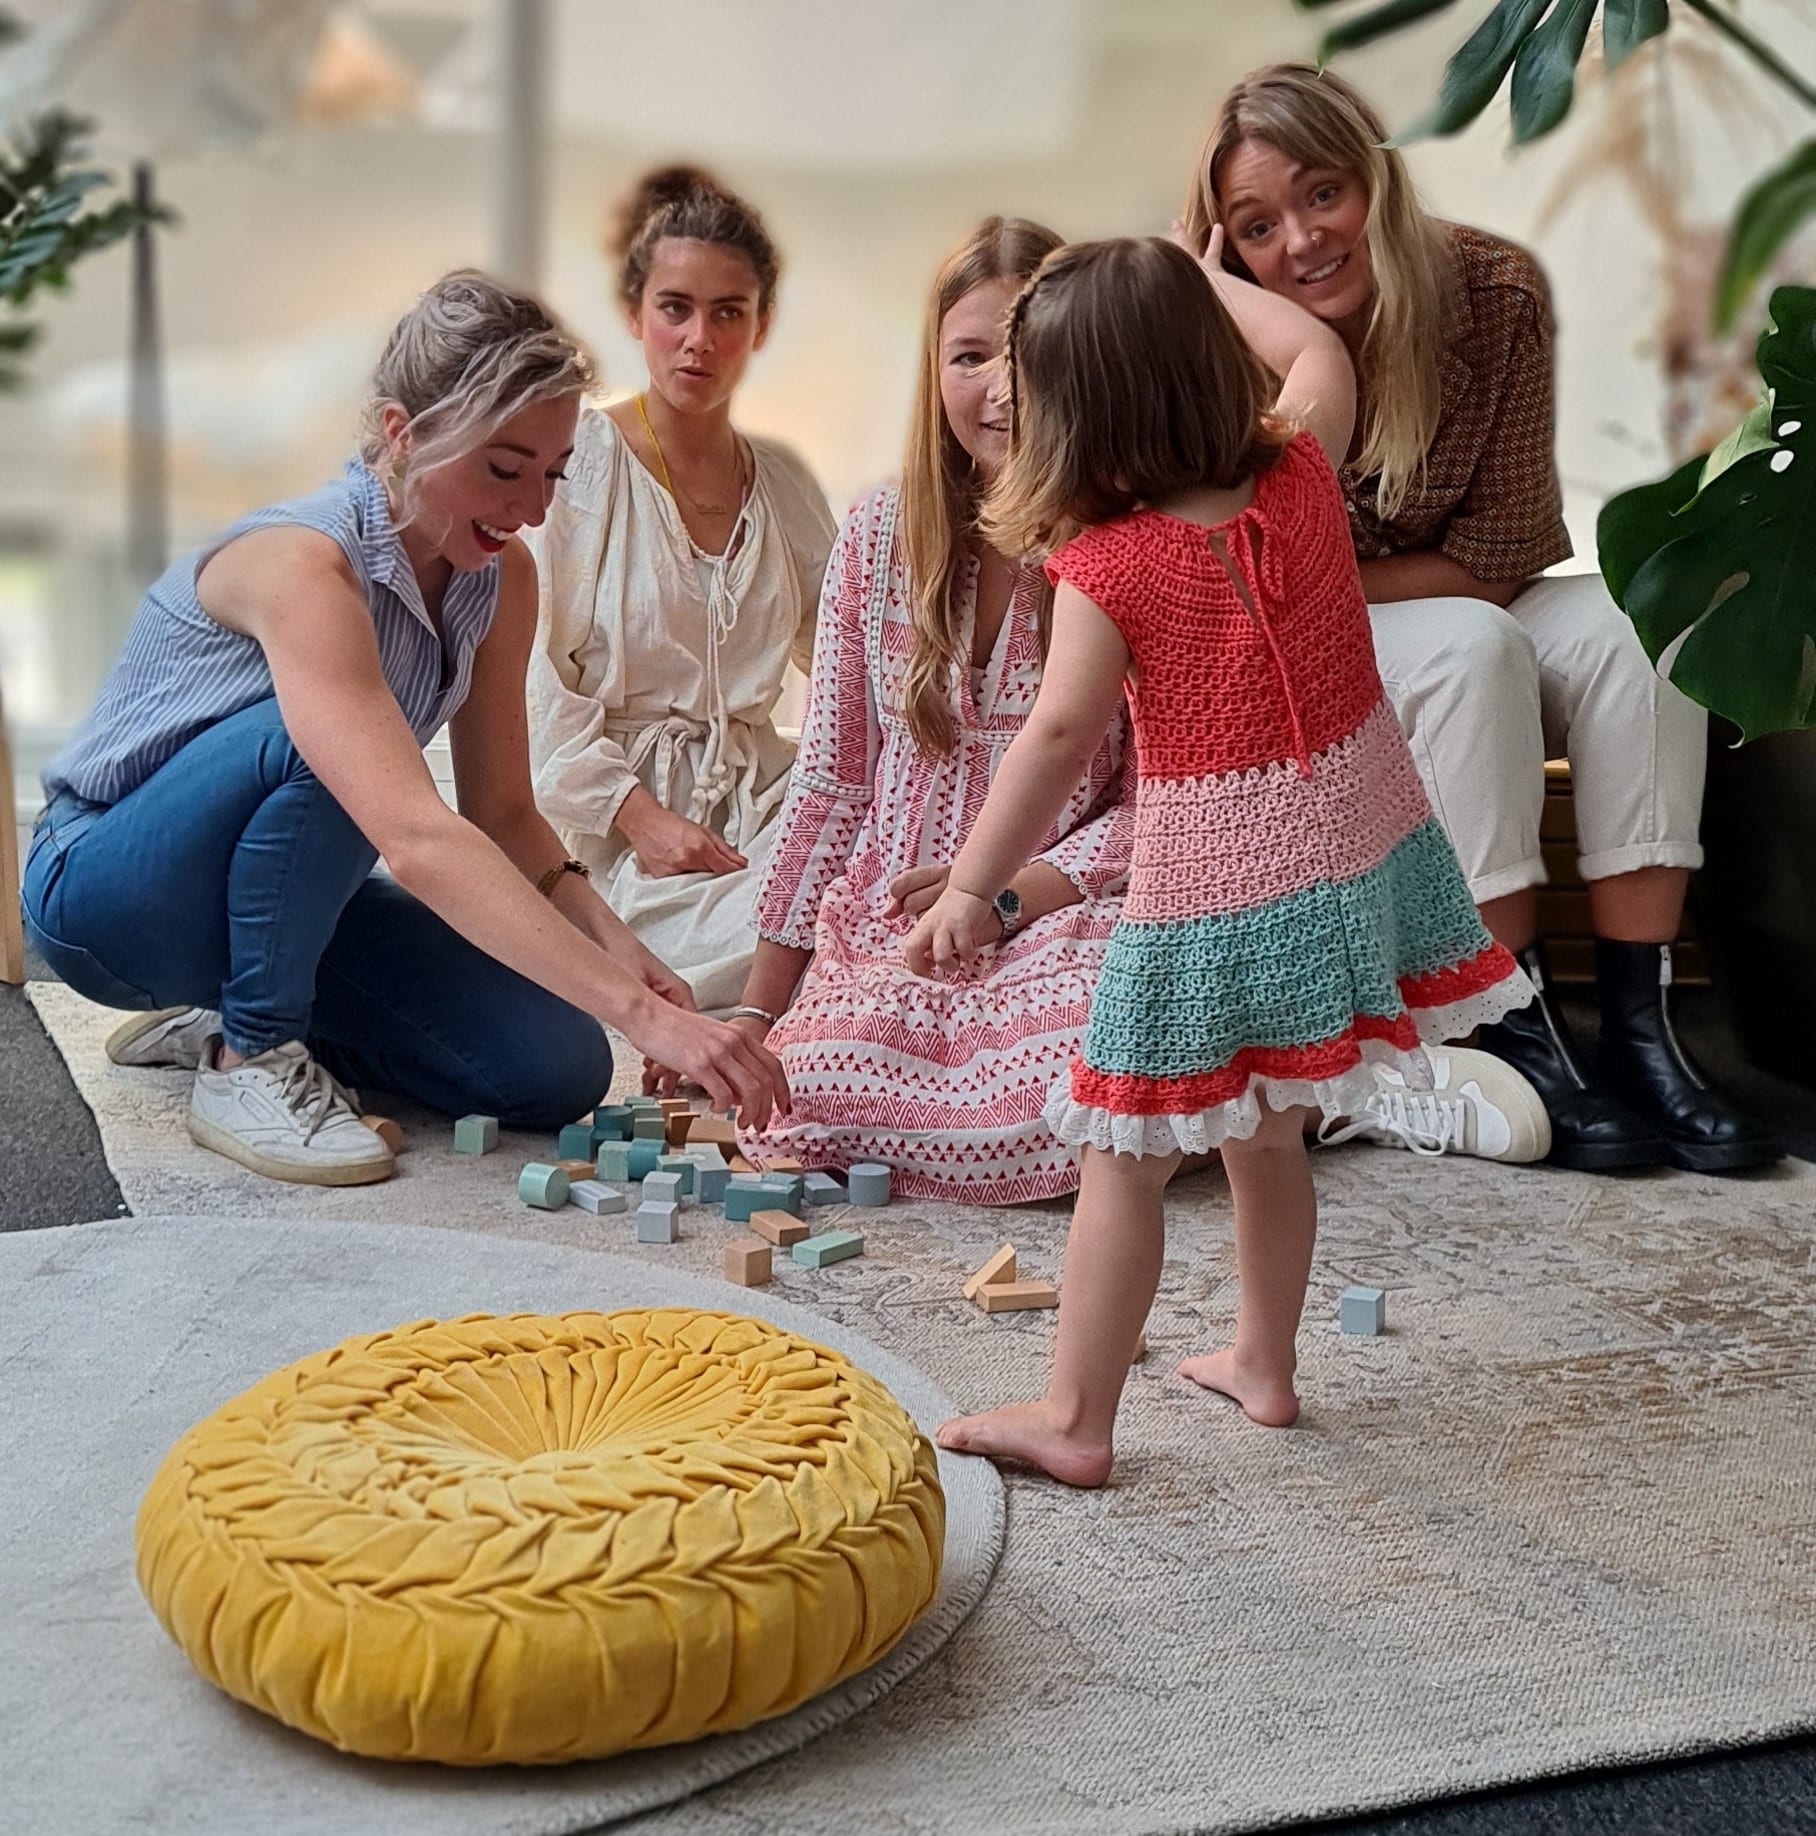 Looking for babysitting jobs? Look no further! In this image you see four girls having fun with a cute toddler and a yellow cushion on the ground